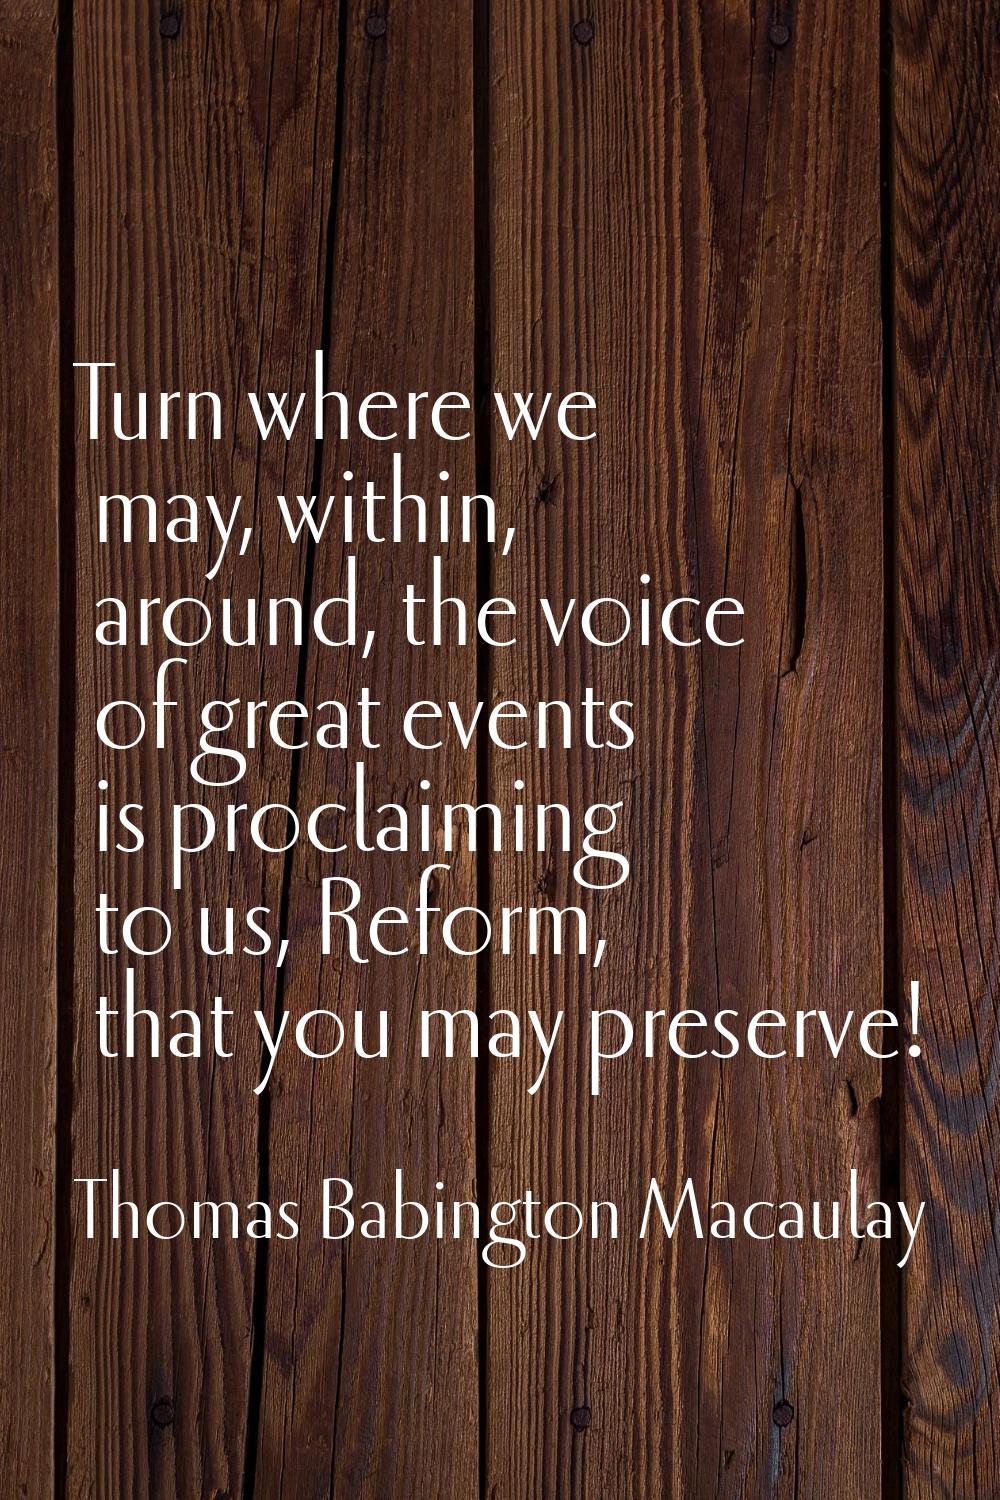 Turn where we may, within, around, the voice of great events is proclaiming to us, Reform, that you